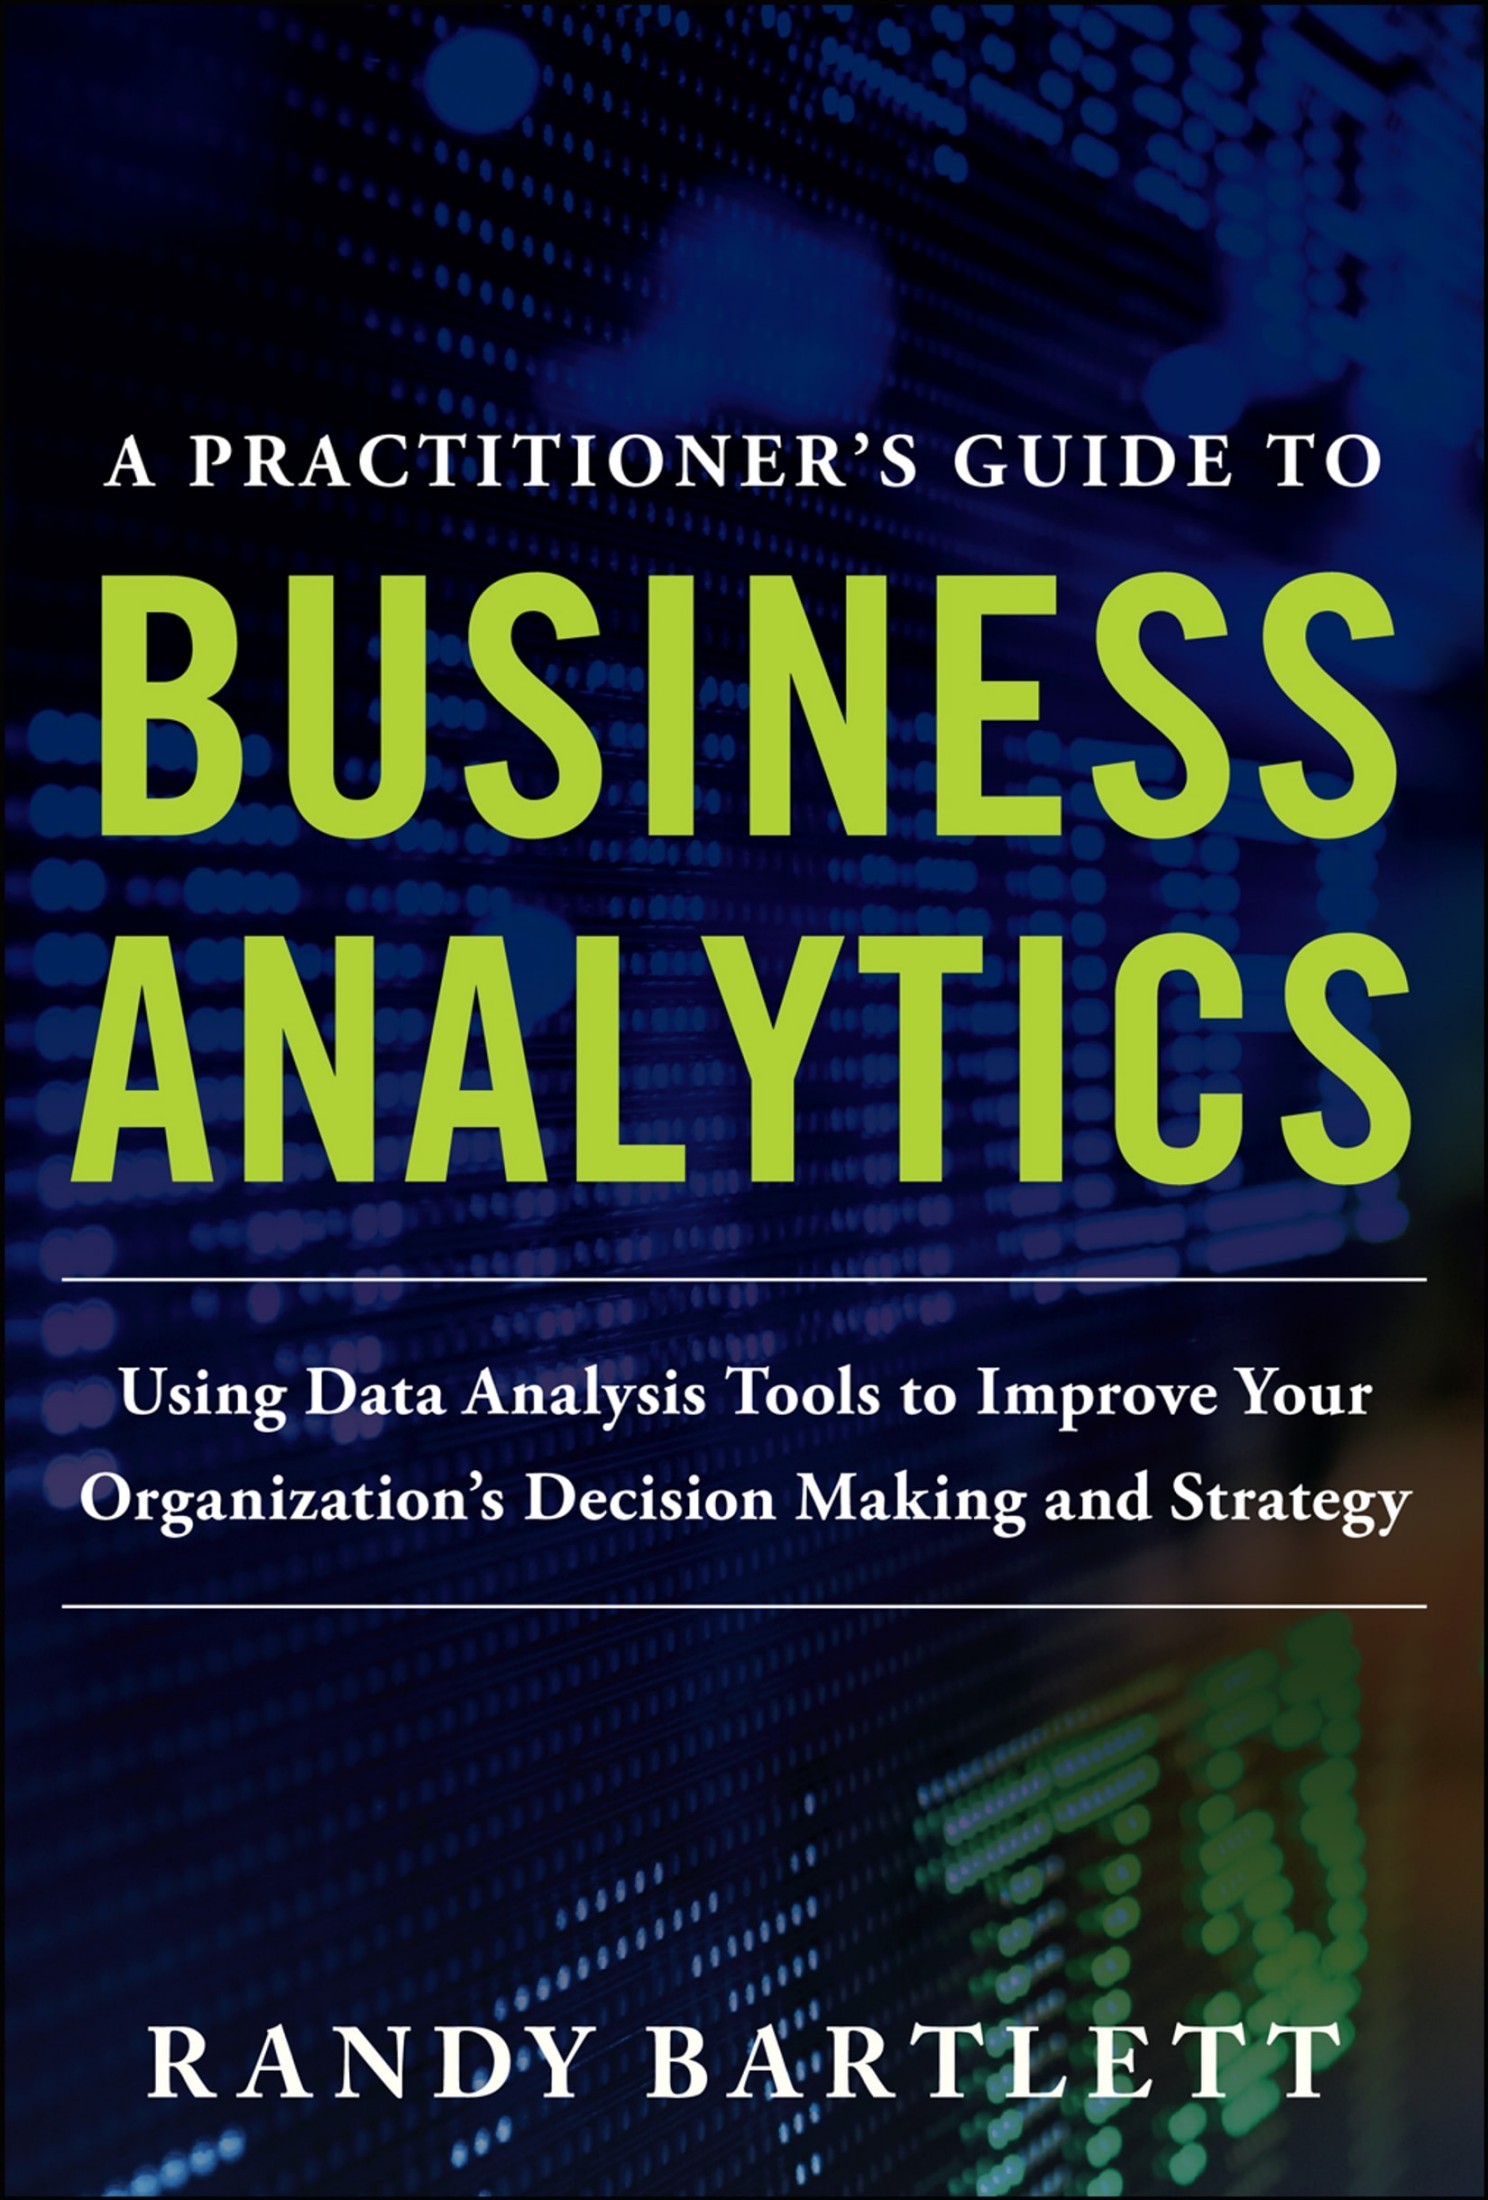 A Practitioner's Guide To Business Analytics: Using Data Analysis Tools to Improve Your Organization’s Decision Making and Strategy